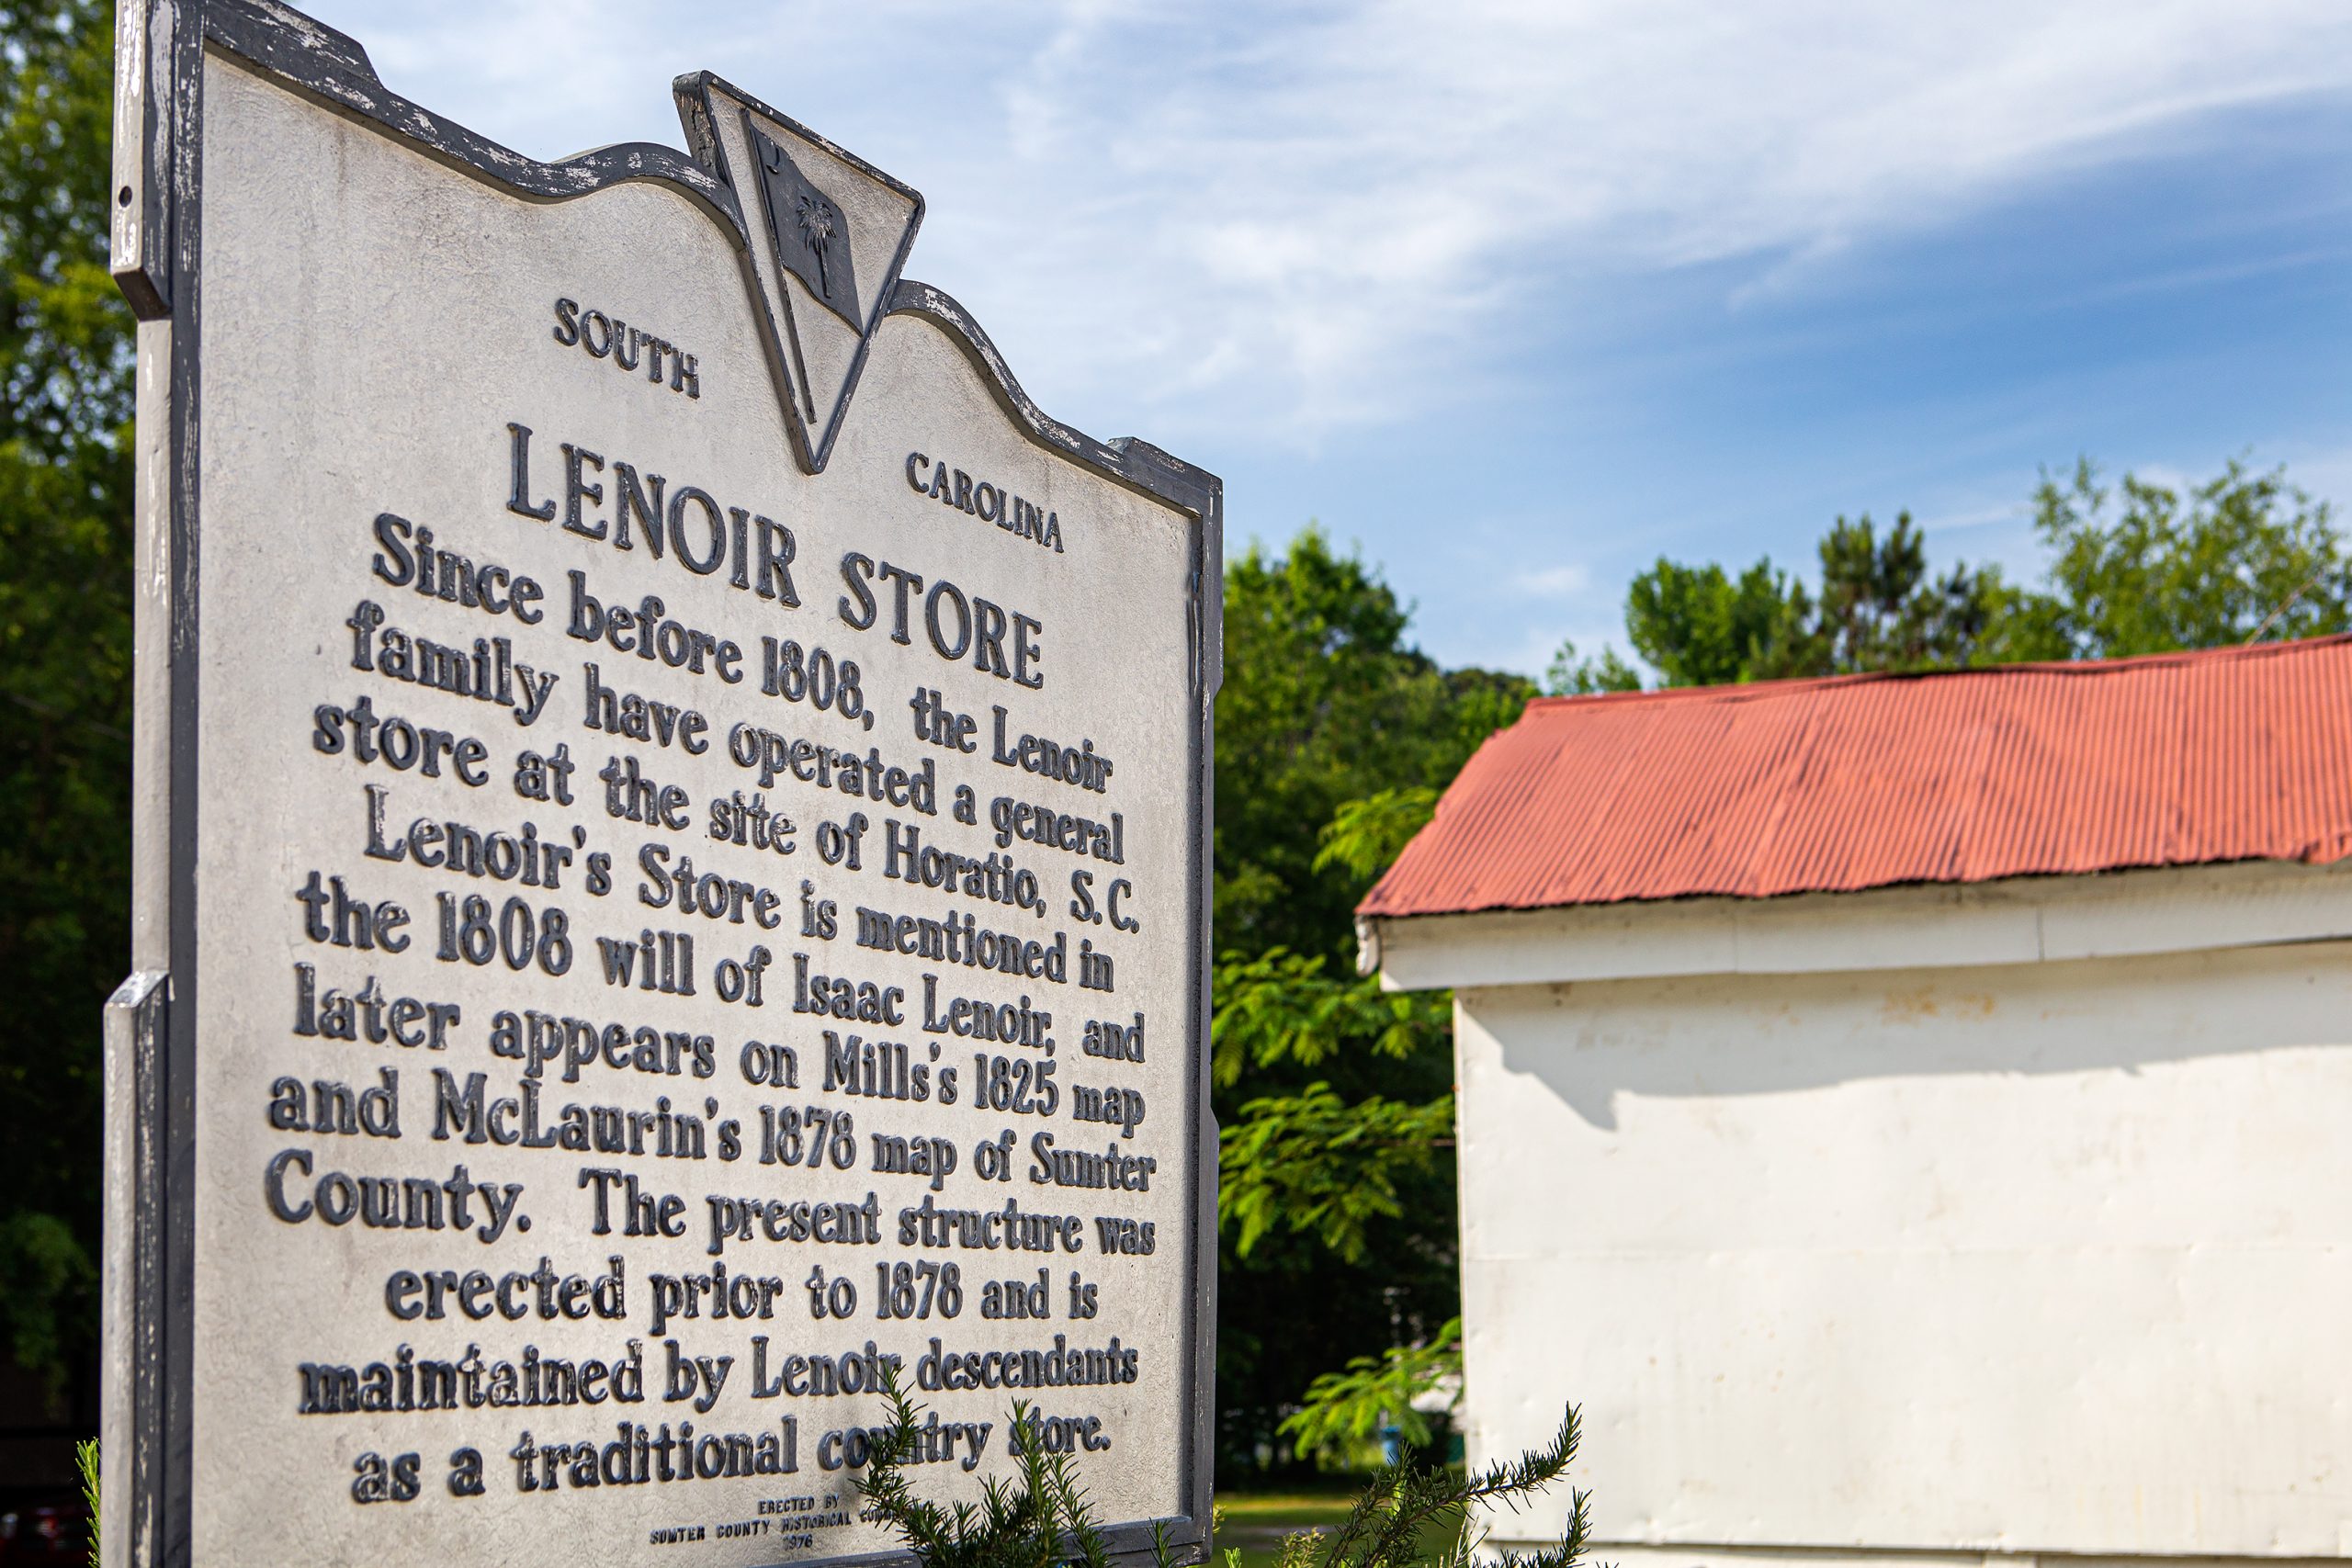 Listed on the National Register of Historic Places, the Lenoir family general store has remained in the family for centuries. Several records indicate the store, located in the high hills of Santee, has operated since 1765, which would make the store one of the oldest continuous businesses in the United States. The store shares space with the Horatio post office, and the reduction of postal service locations in the United States threatens the existence of the store. Renovations are currently being done to the store in order to increase its viability to the local community. Popular items fill the shelves, along with memorabilia from the store’s past. 